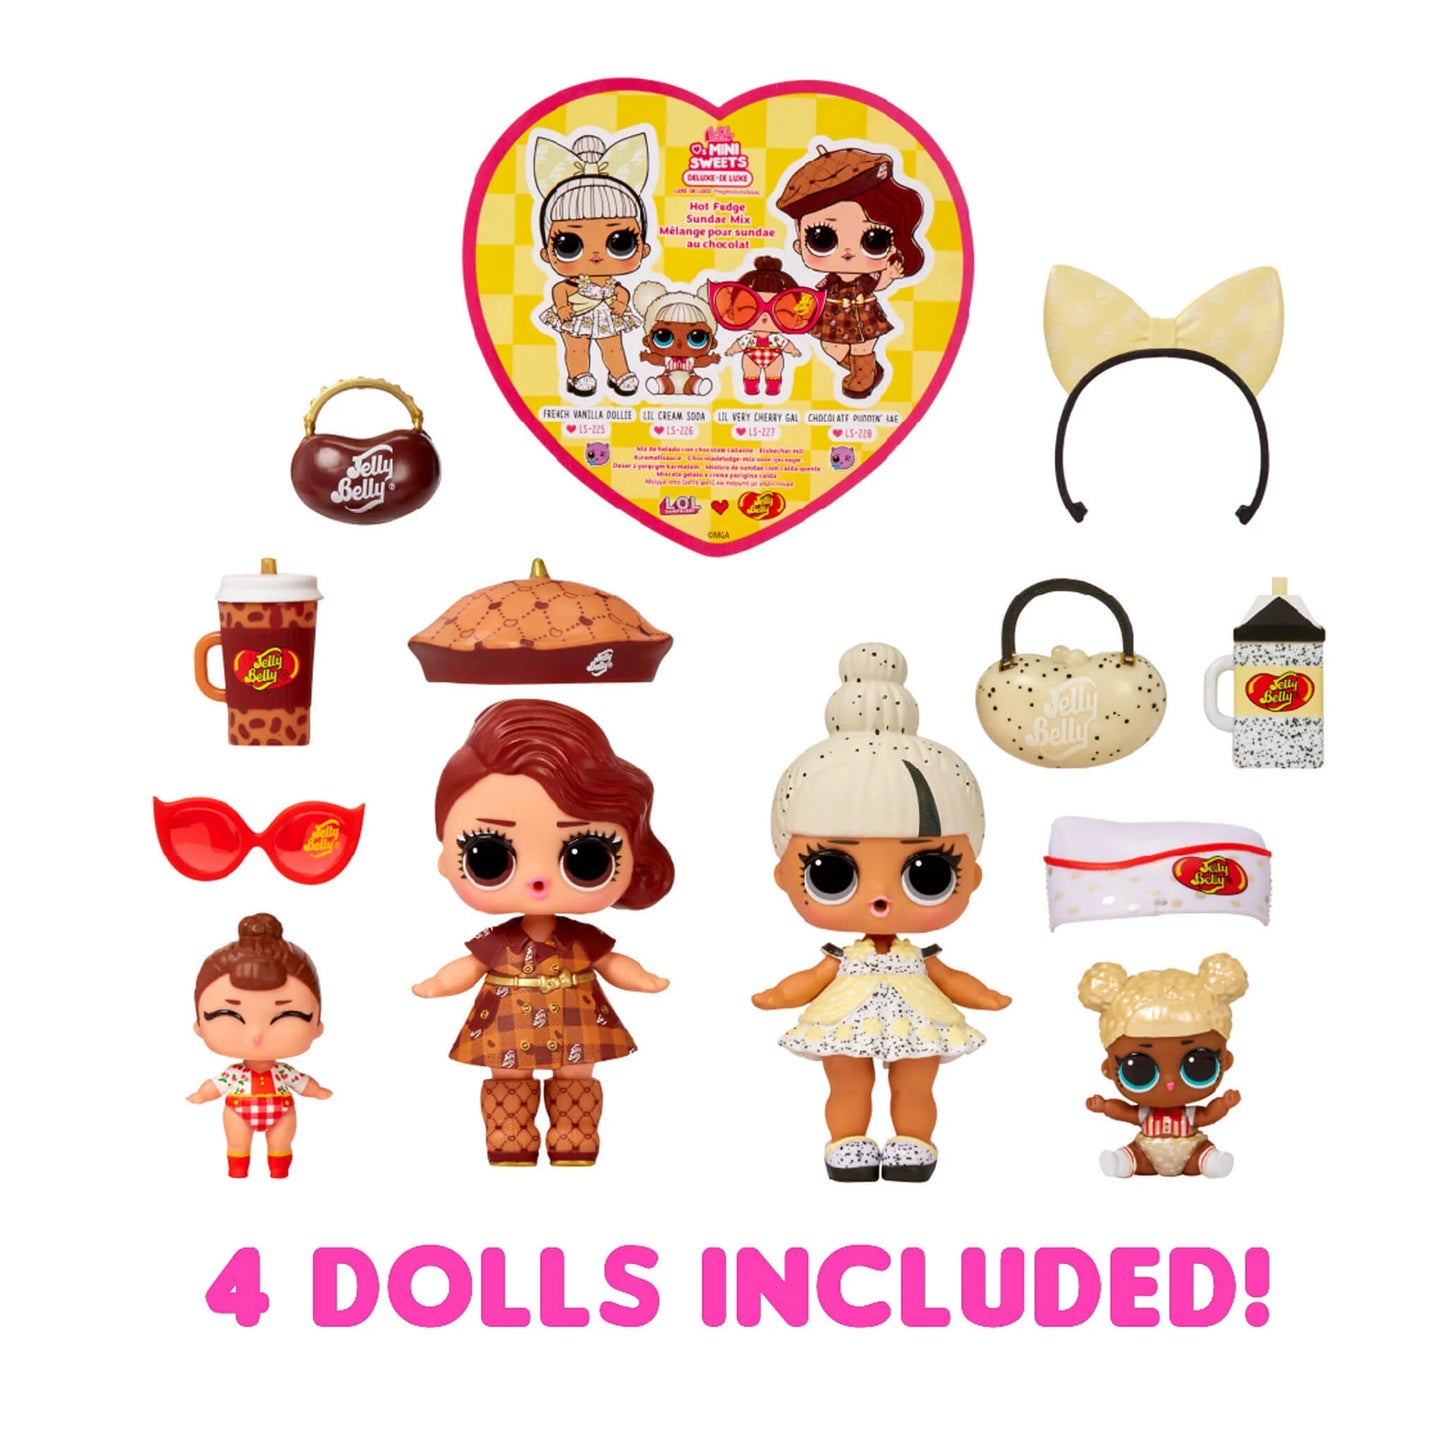 L.O.L. Surprise Loves Mini Sweets Jelly Belly Deluxe Pack S2 in PDQ